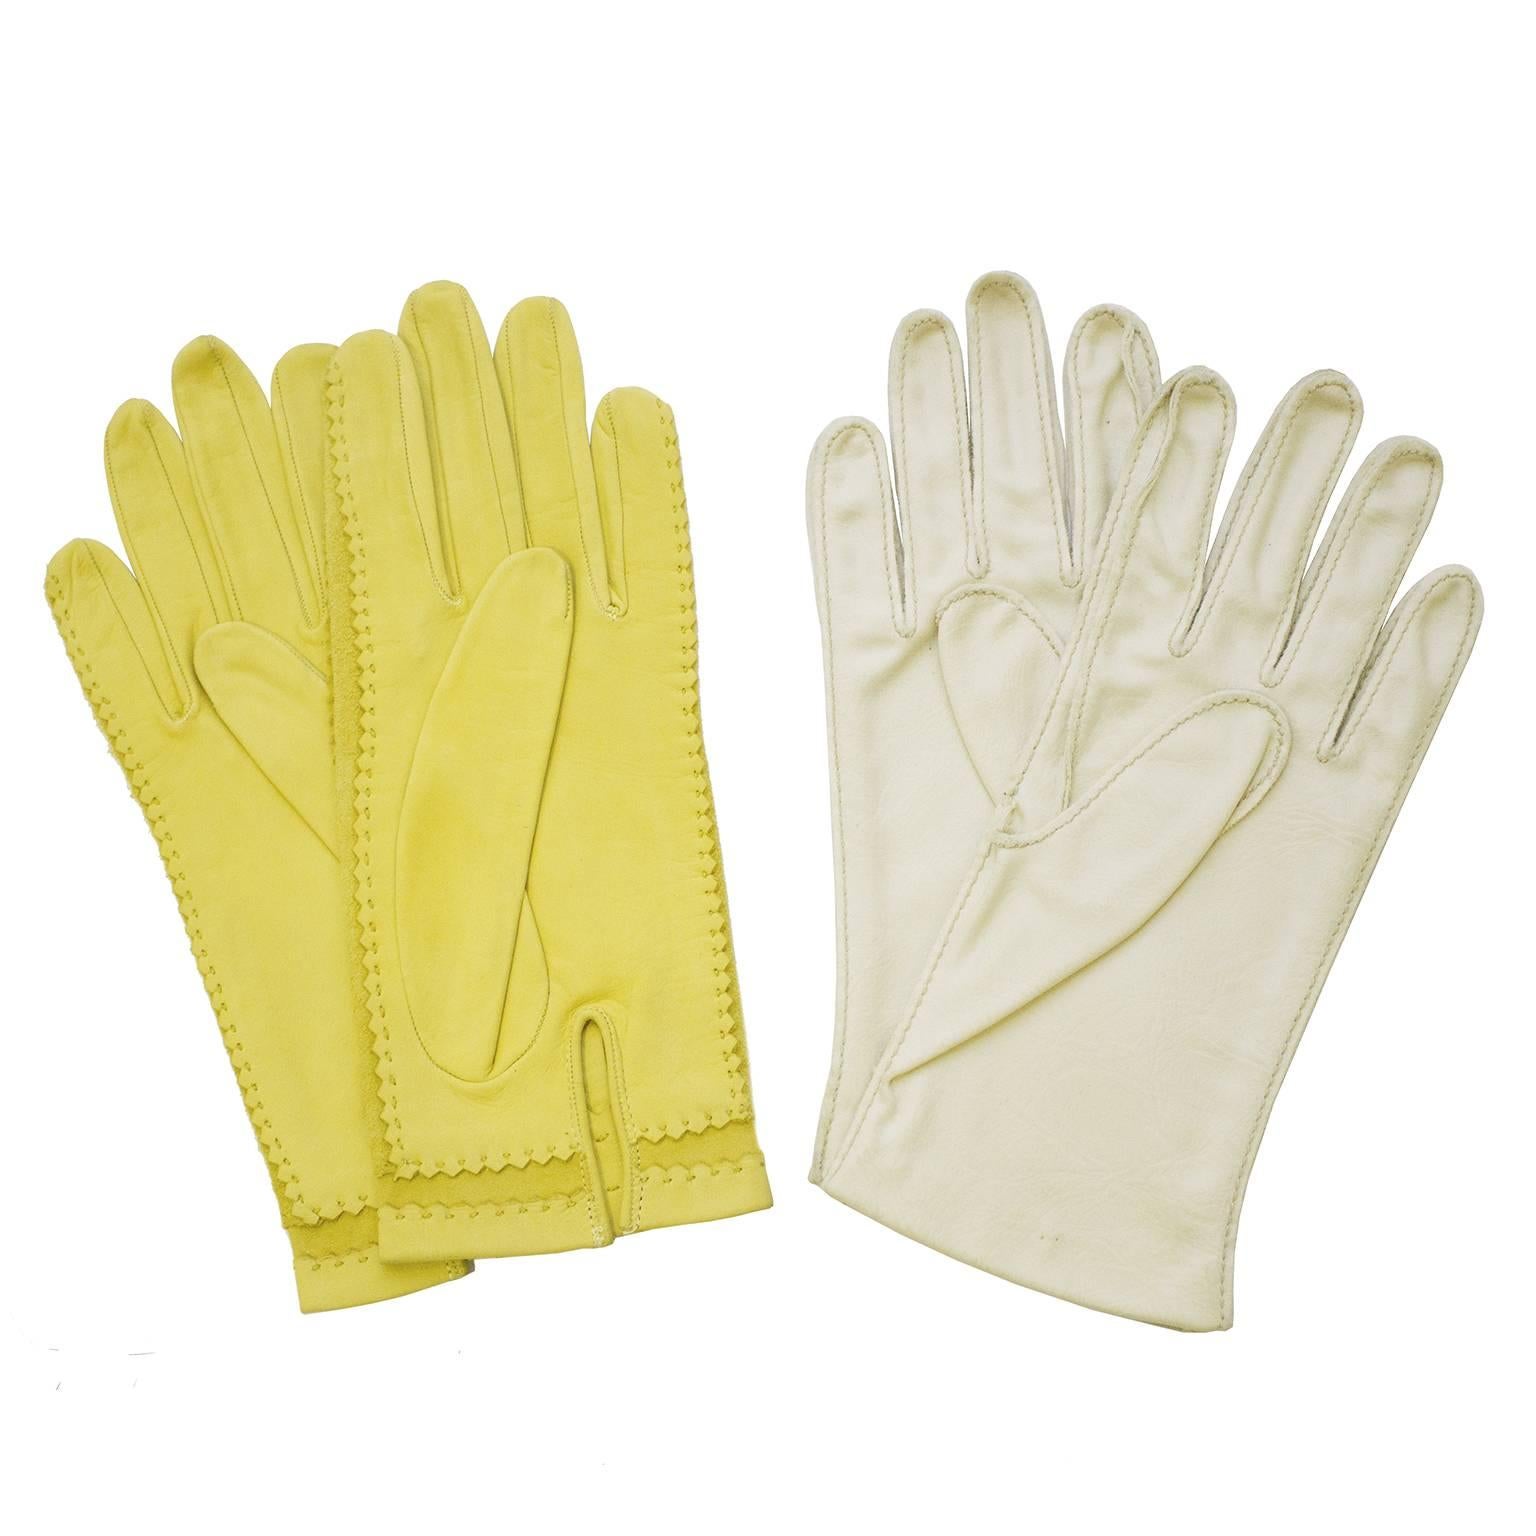 Two pairs of gloves from the 1960's. The first pair have a bright yellow leather top and bottom with cotton inserts, allowing the hand to move freely. The second pair have a cream leather bottom and a cream, brown and tan color blocked vinyl top.